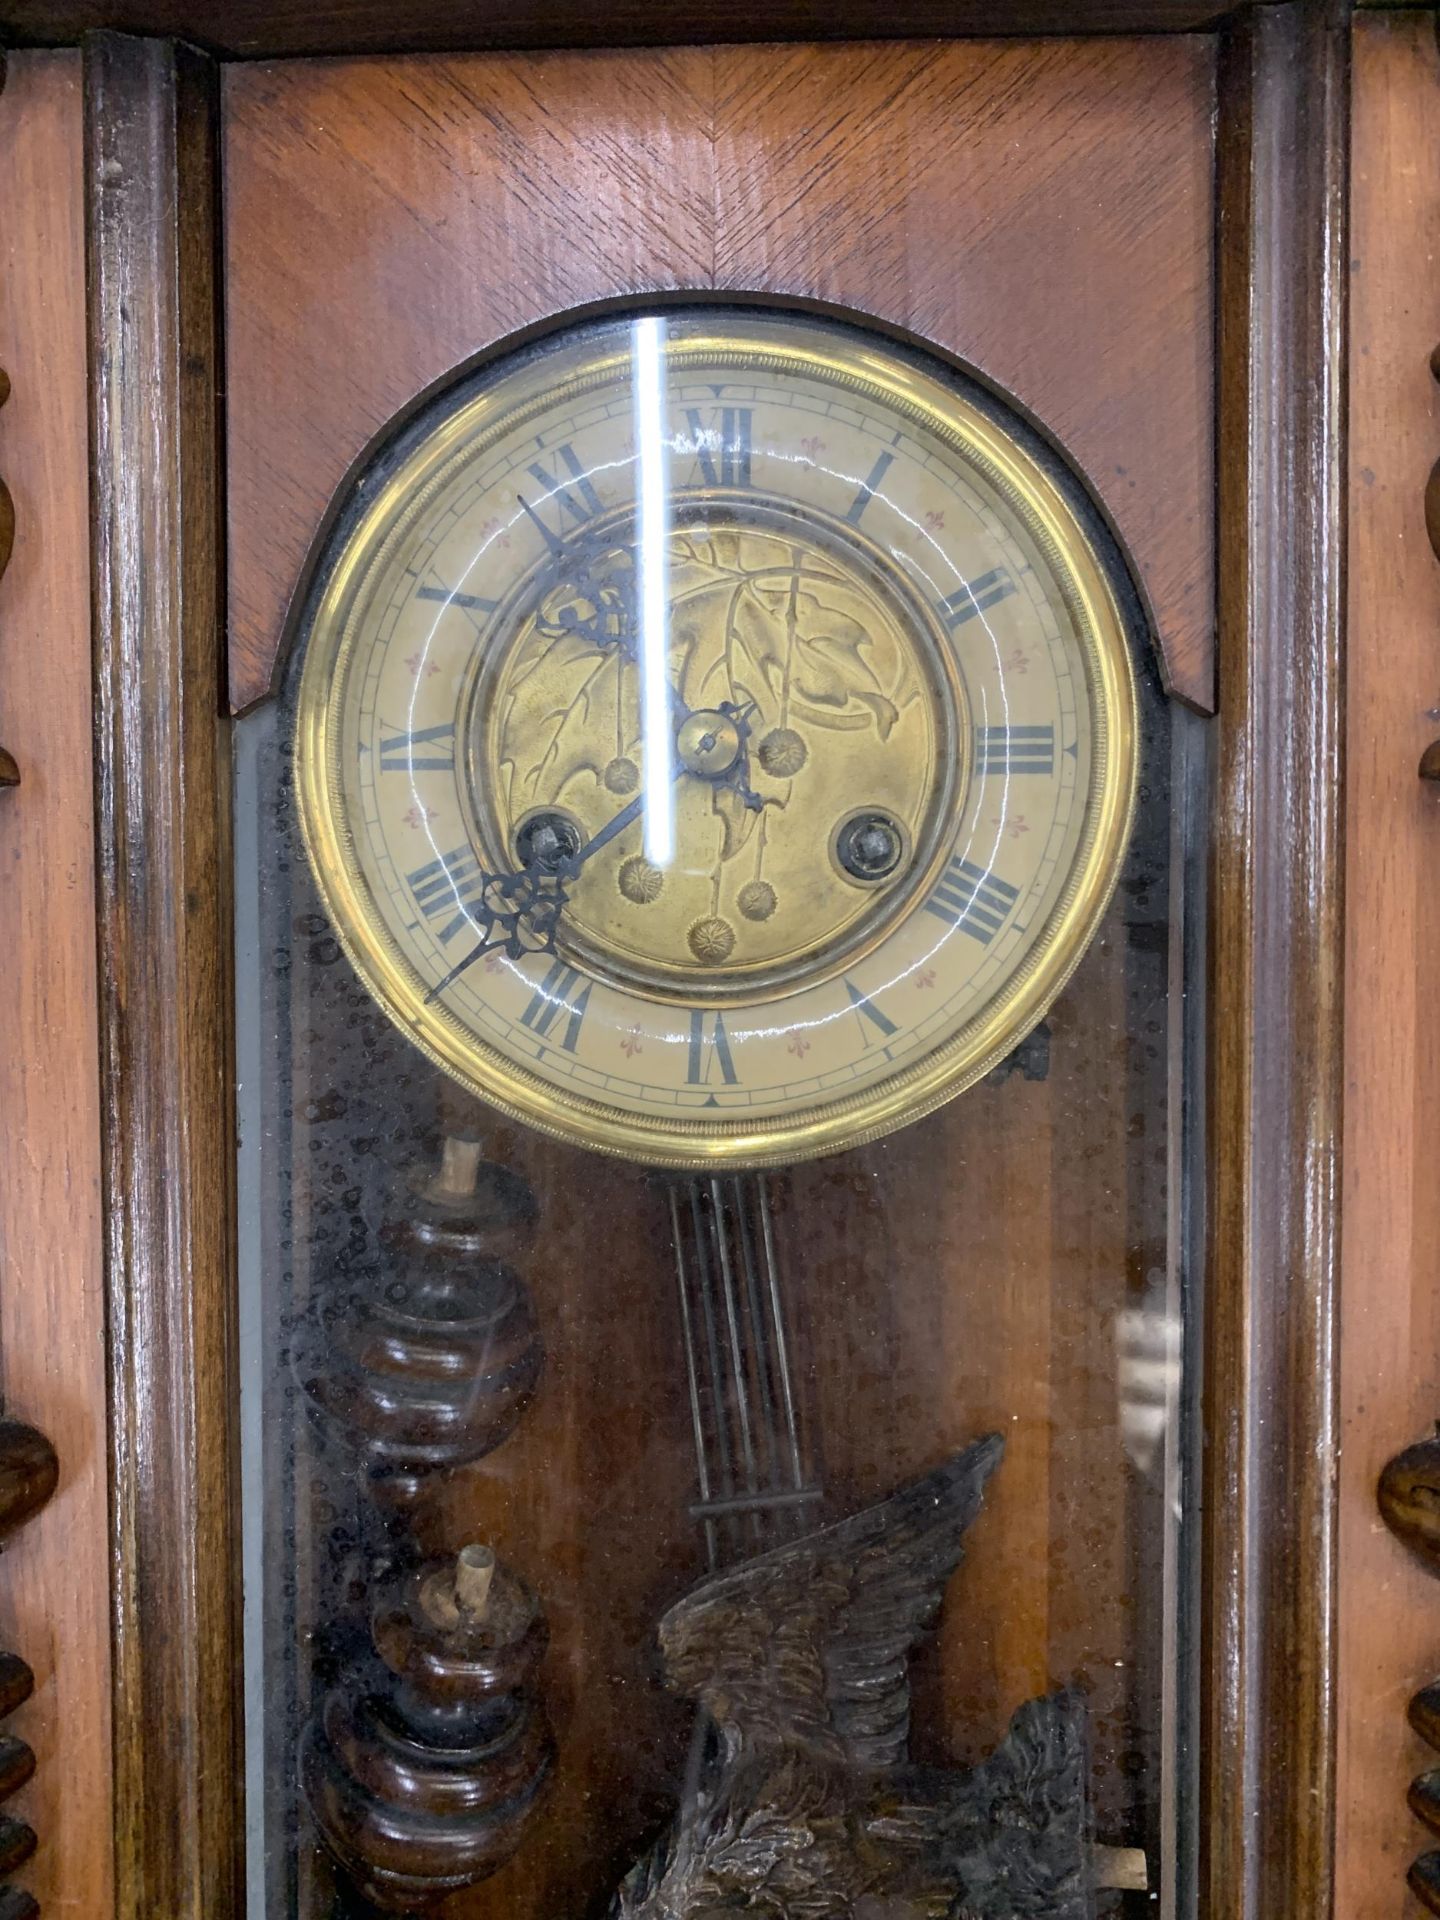 A MAHOGANY CASED VIENNA WALL CLOCK WITH EAGLE DESIGN TOP, WITH PENDULUM AND KEY - Image 5 of 7